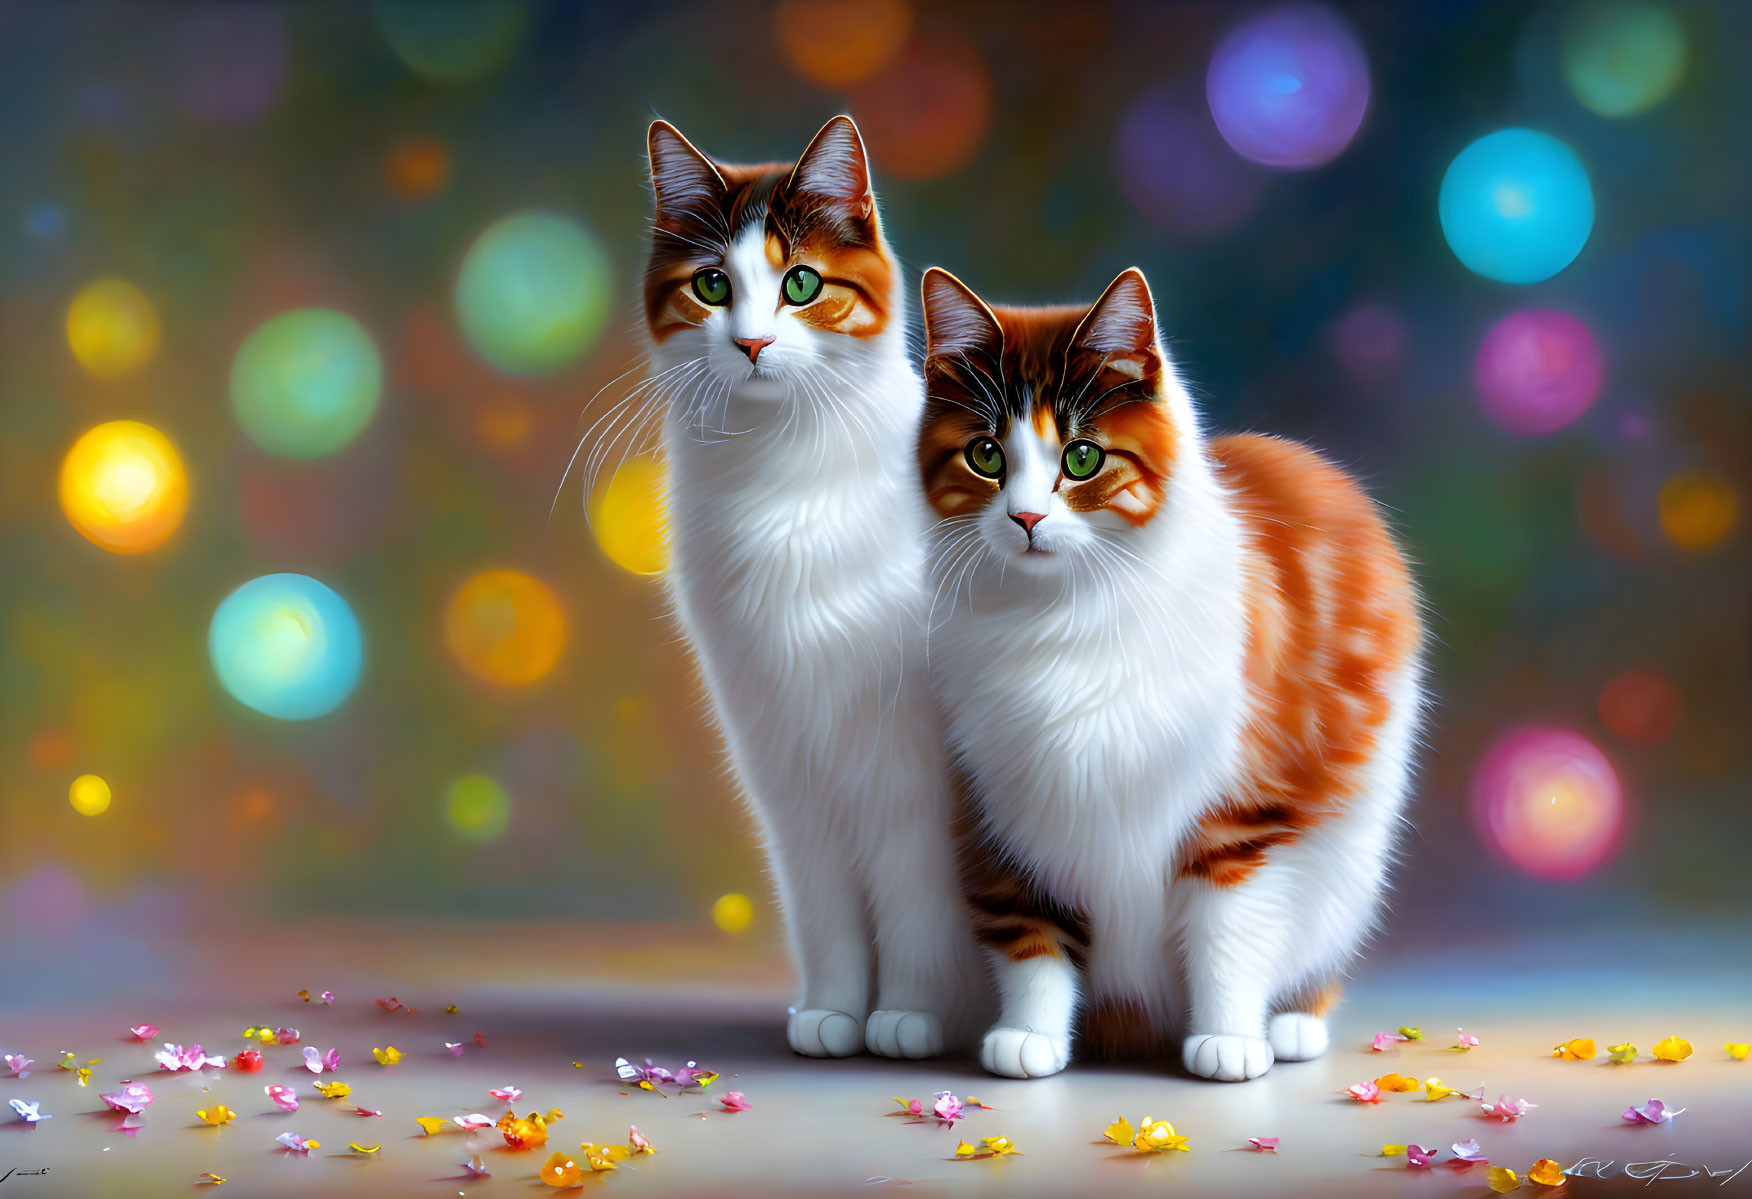 Vibrant animated cats with orange and white fur in floral setting